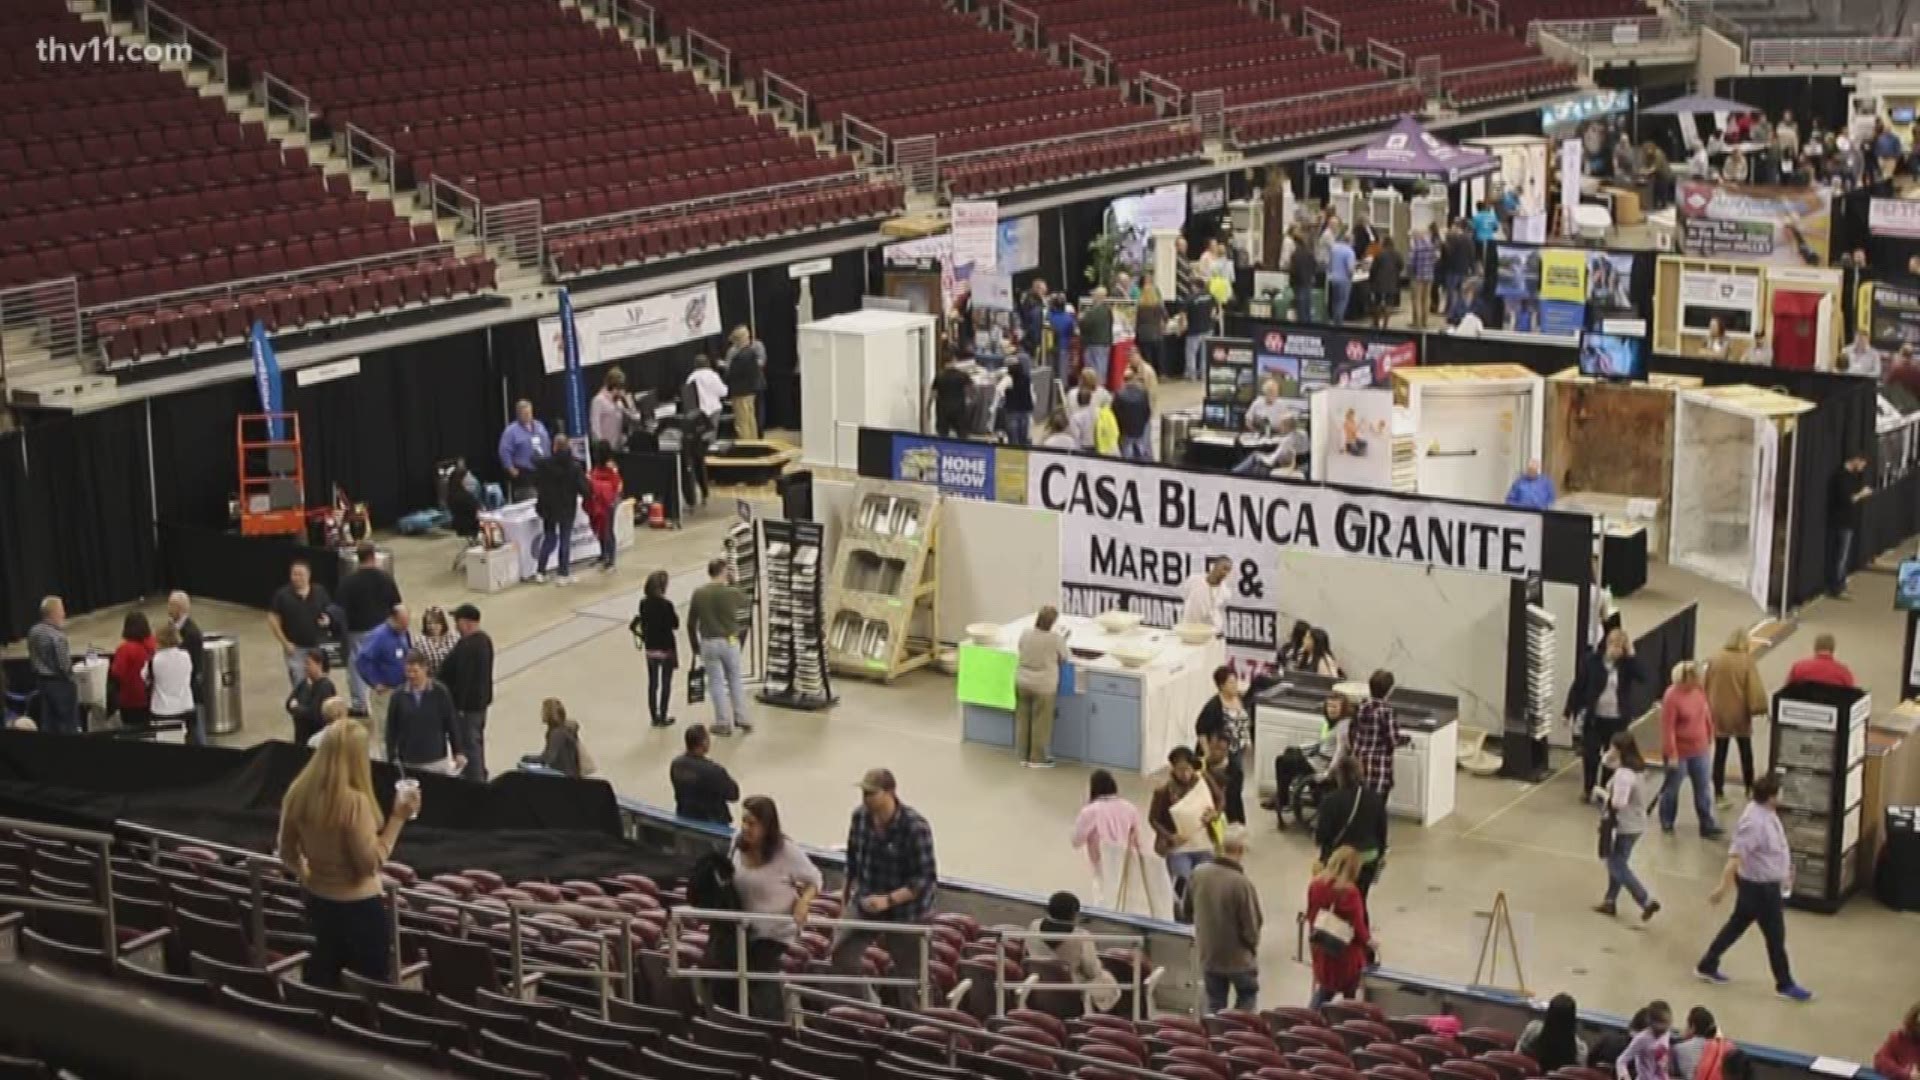 Thousands of people are getting some DIY inspiration as the Home Show comes to Little Rock.